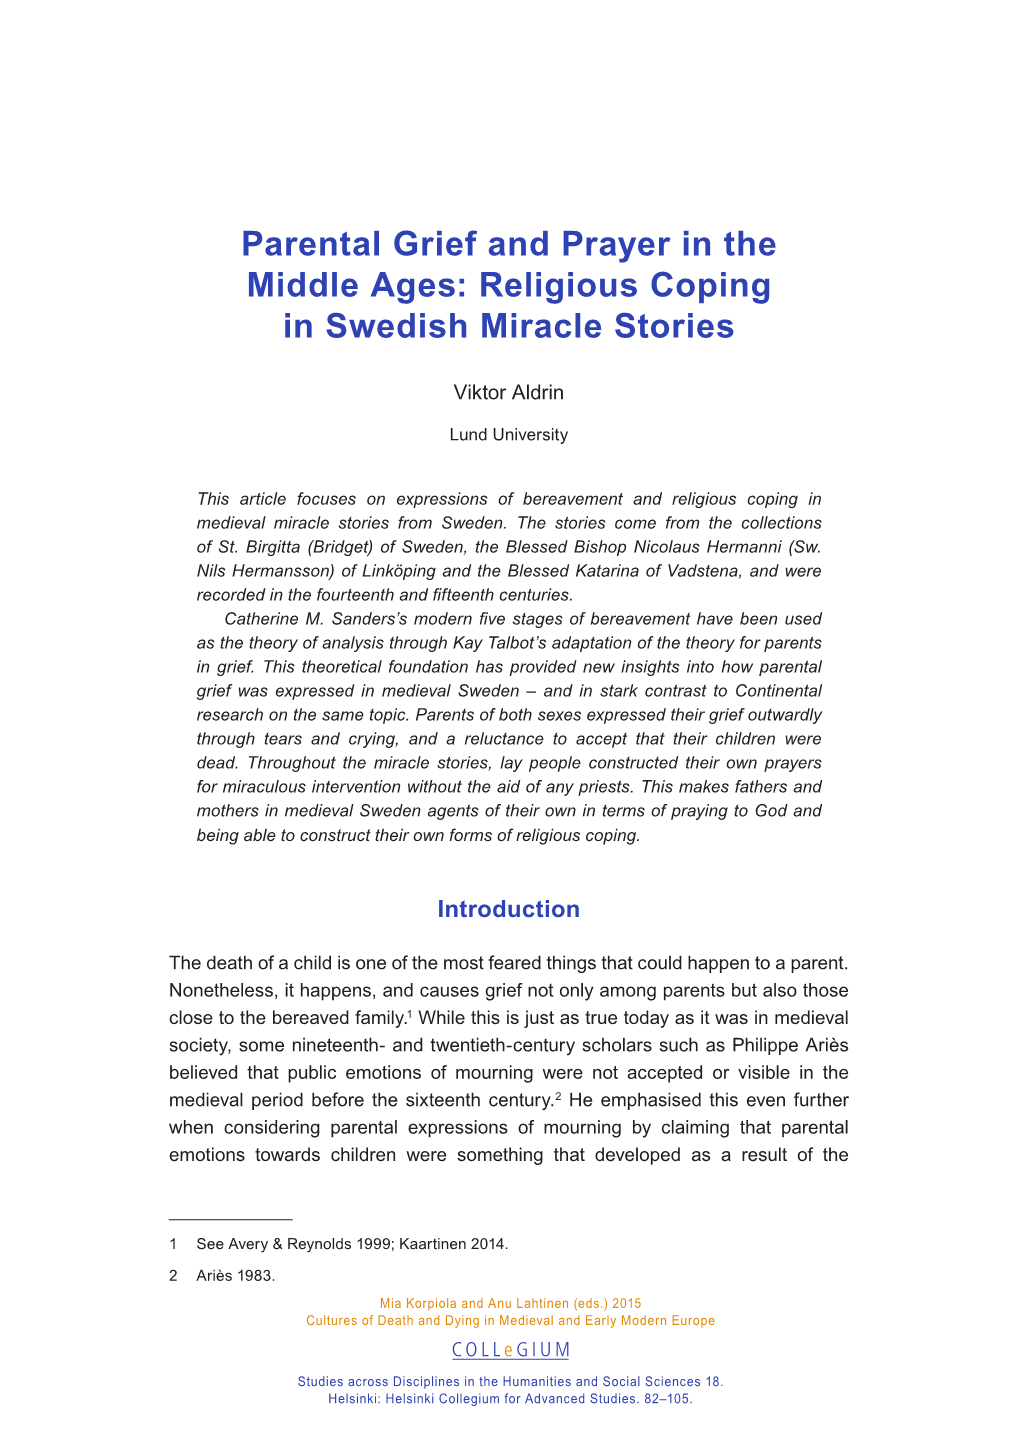 Parental Grief and Prayer in the Middle Ages: Religious Coping in Swedish Miracle Stories